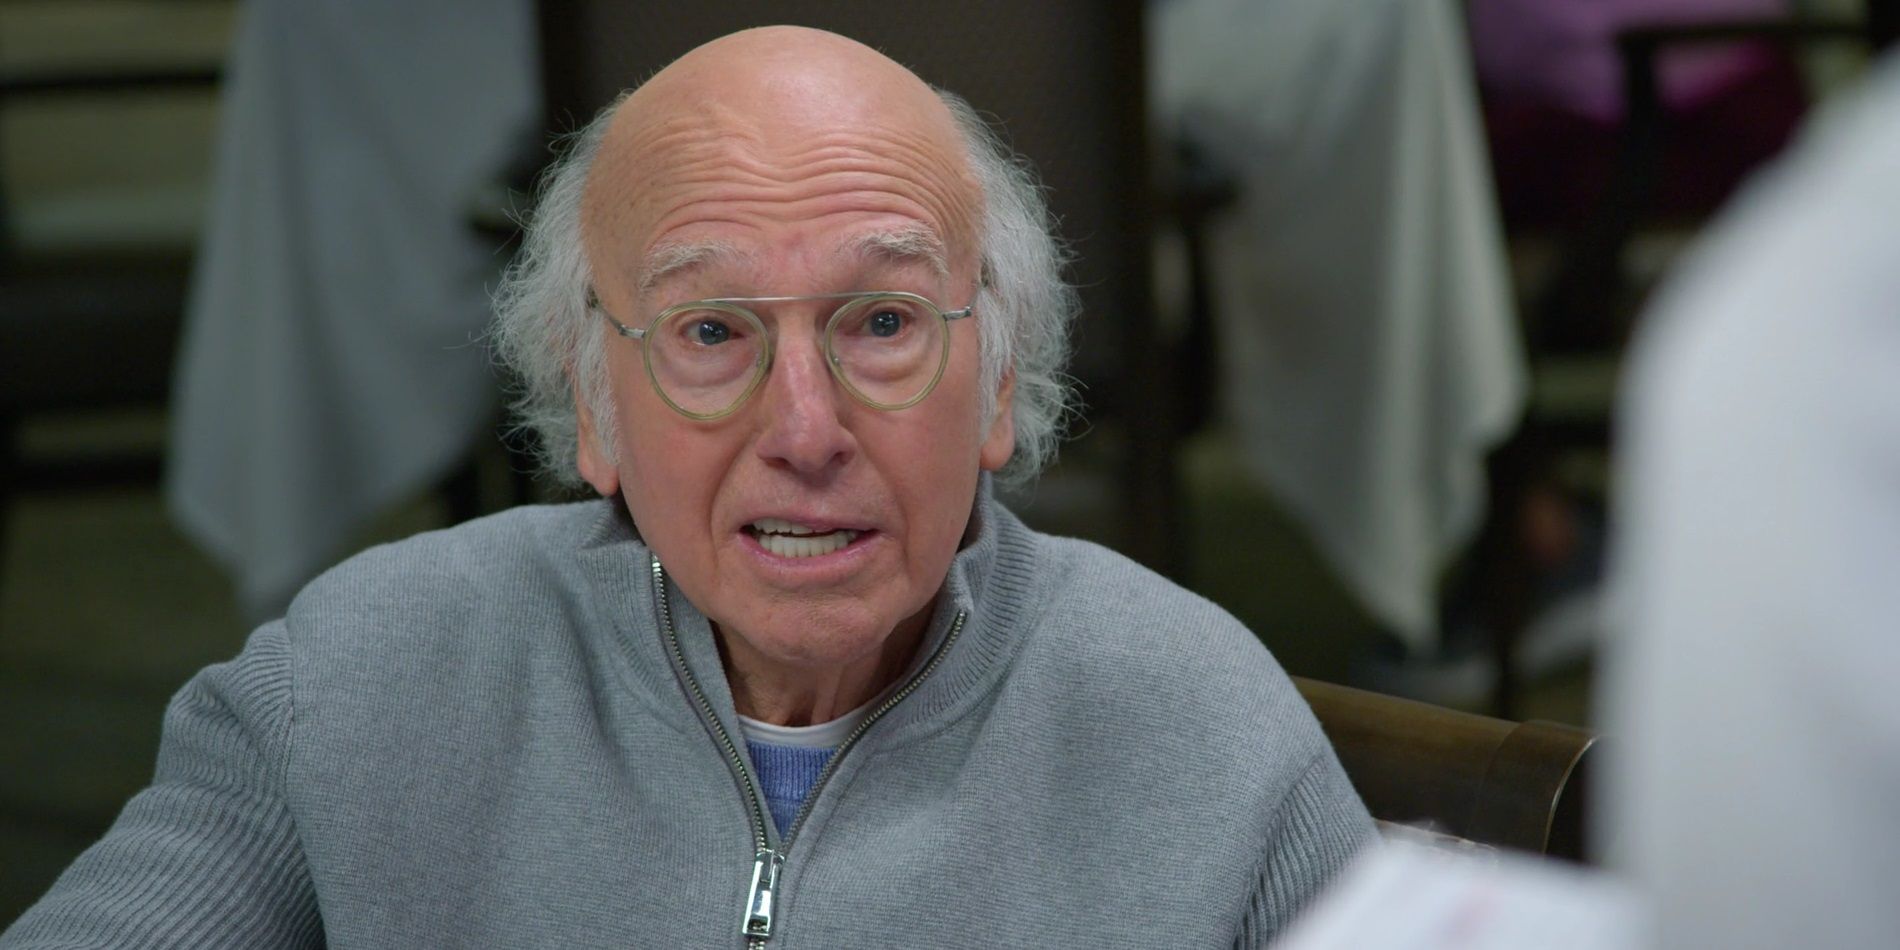 Larry orders in a restaurant in Curb Your Enthusiasm